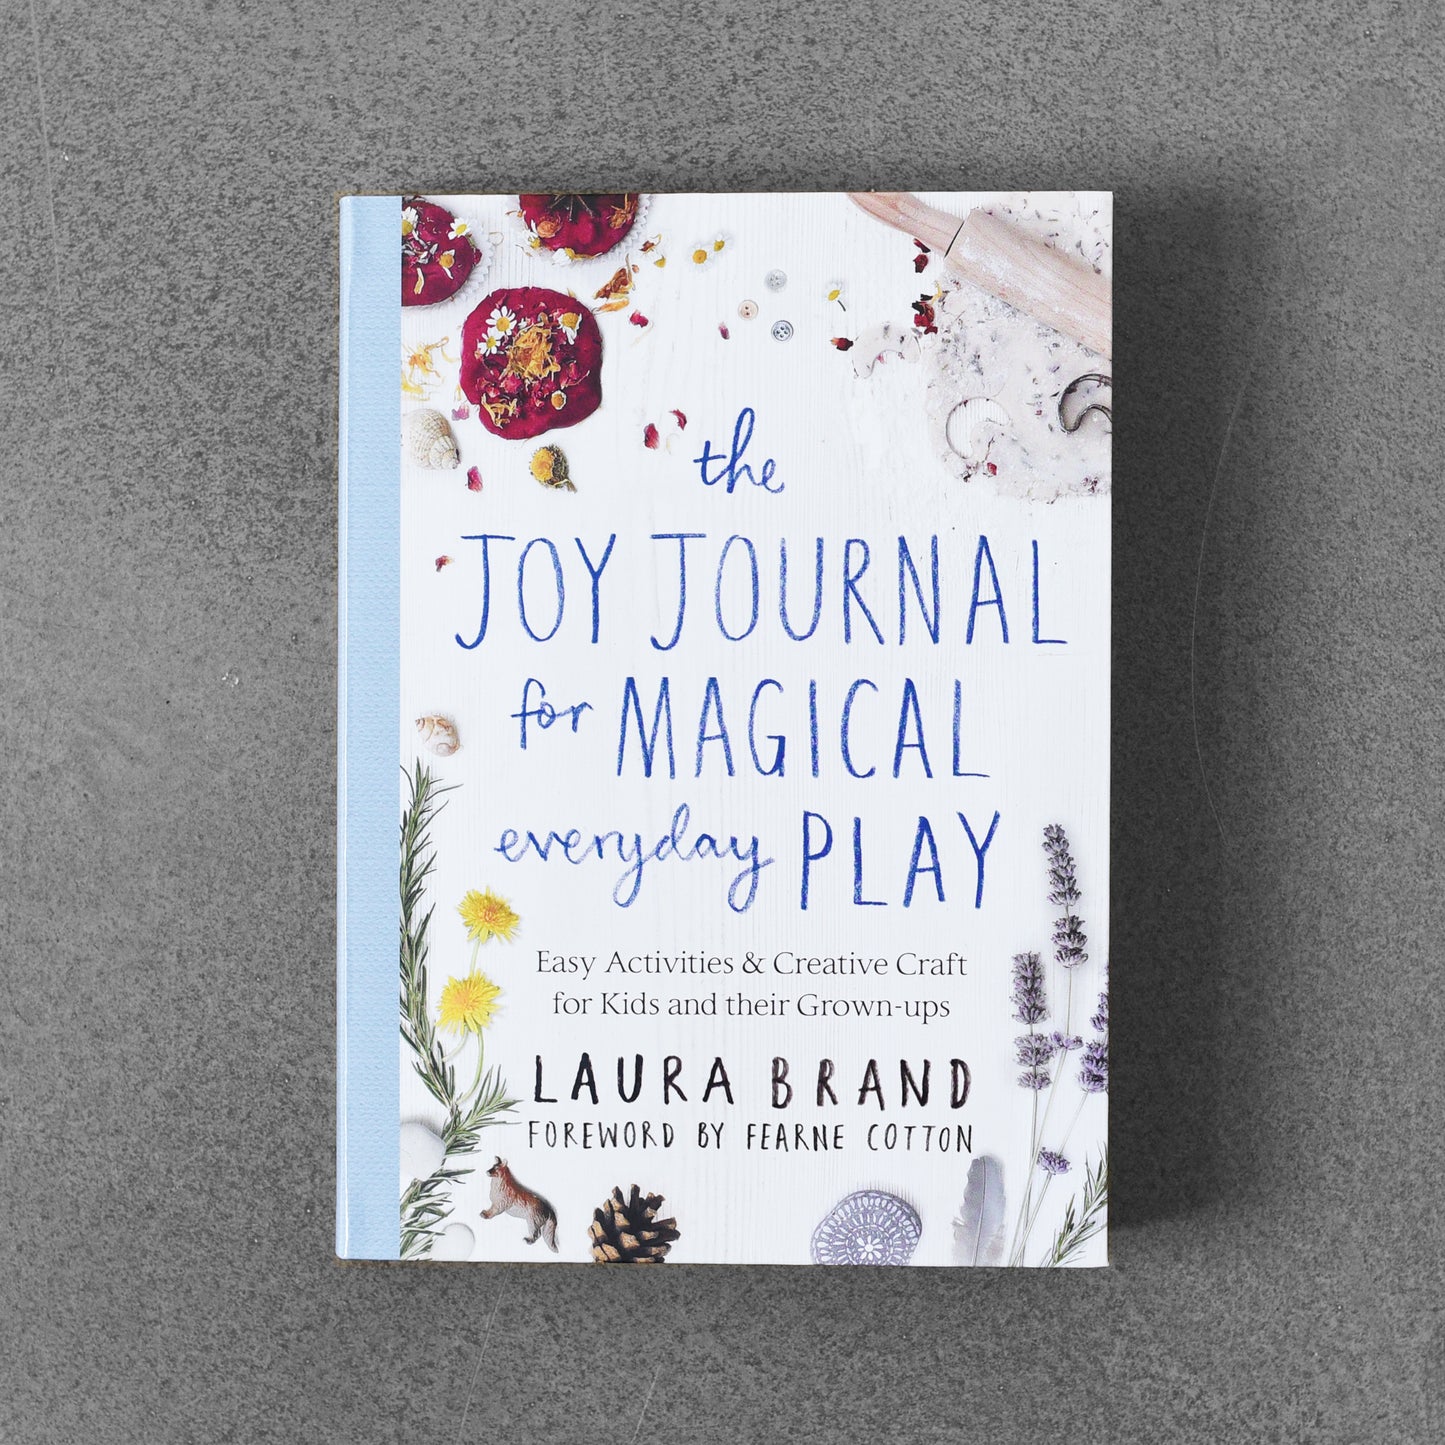 The Joy Journal for Magical Everyday Play - Laura Brand